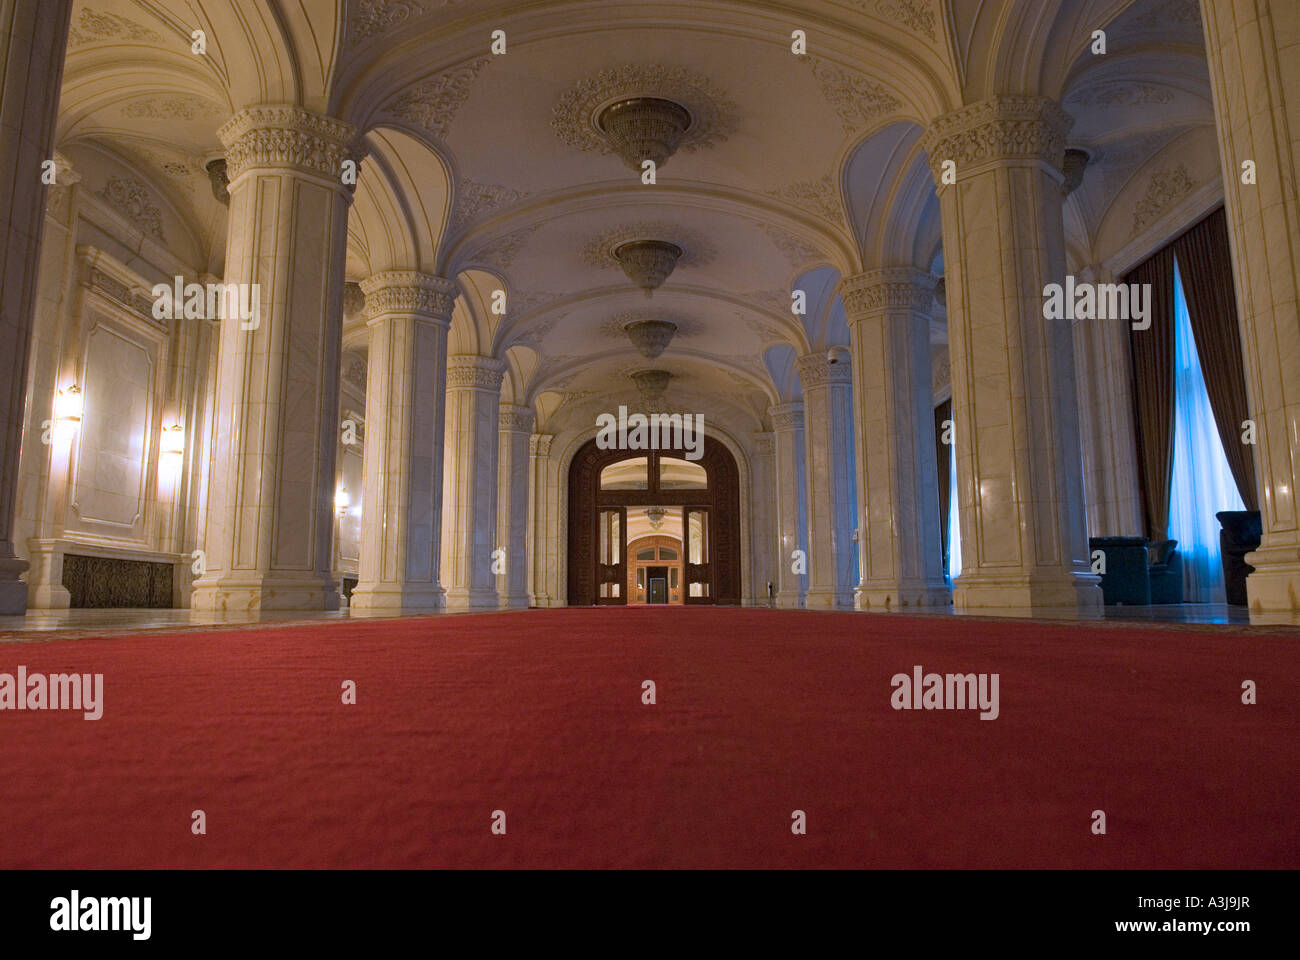 Interior view of The Palace of the Parliament (Palatul Parlamentului) in Bucharest, Romania Stock Photo